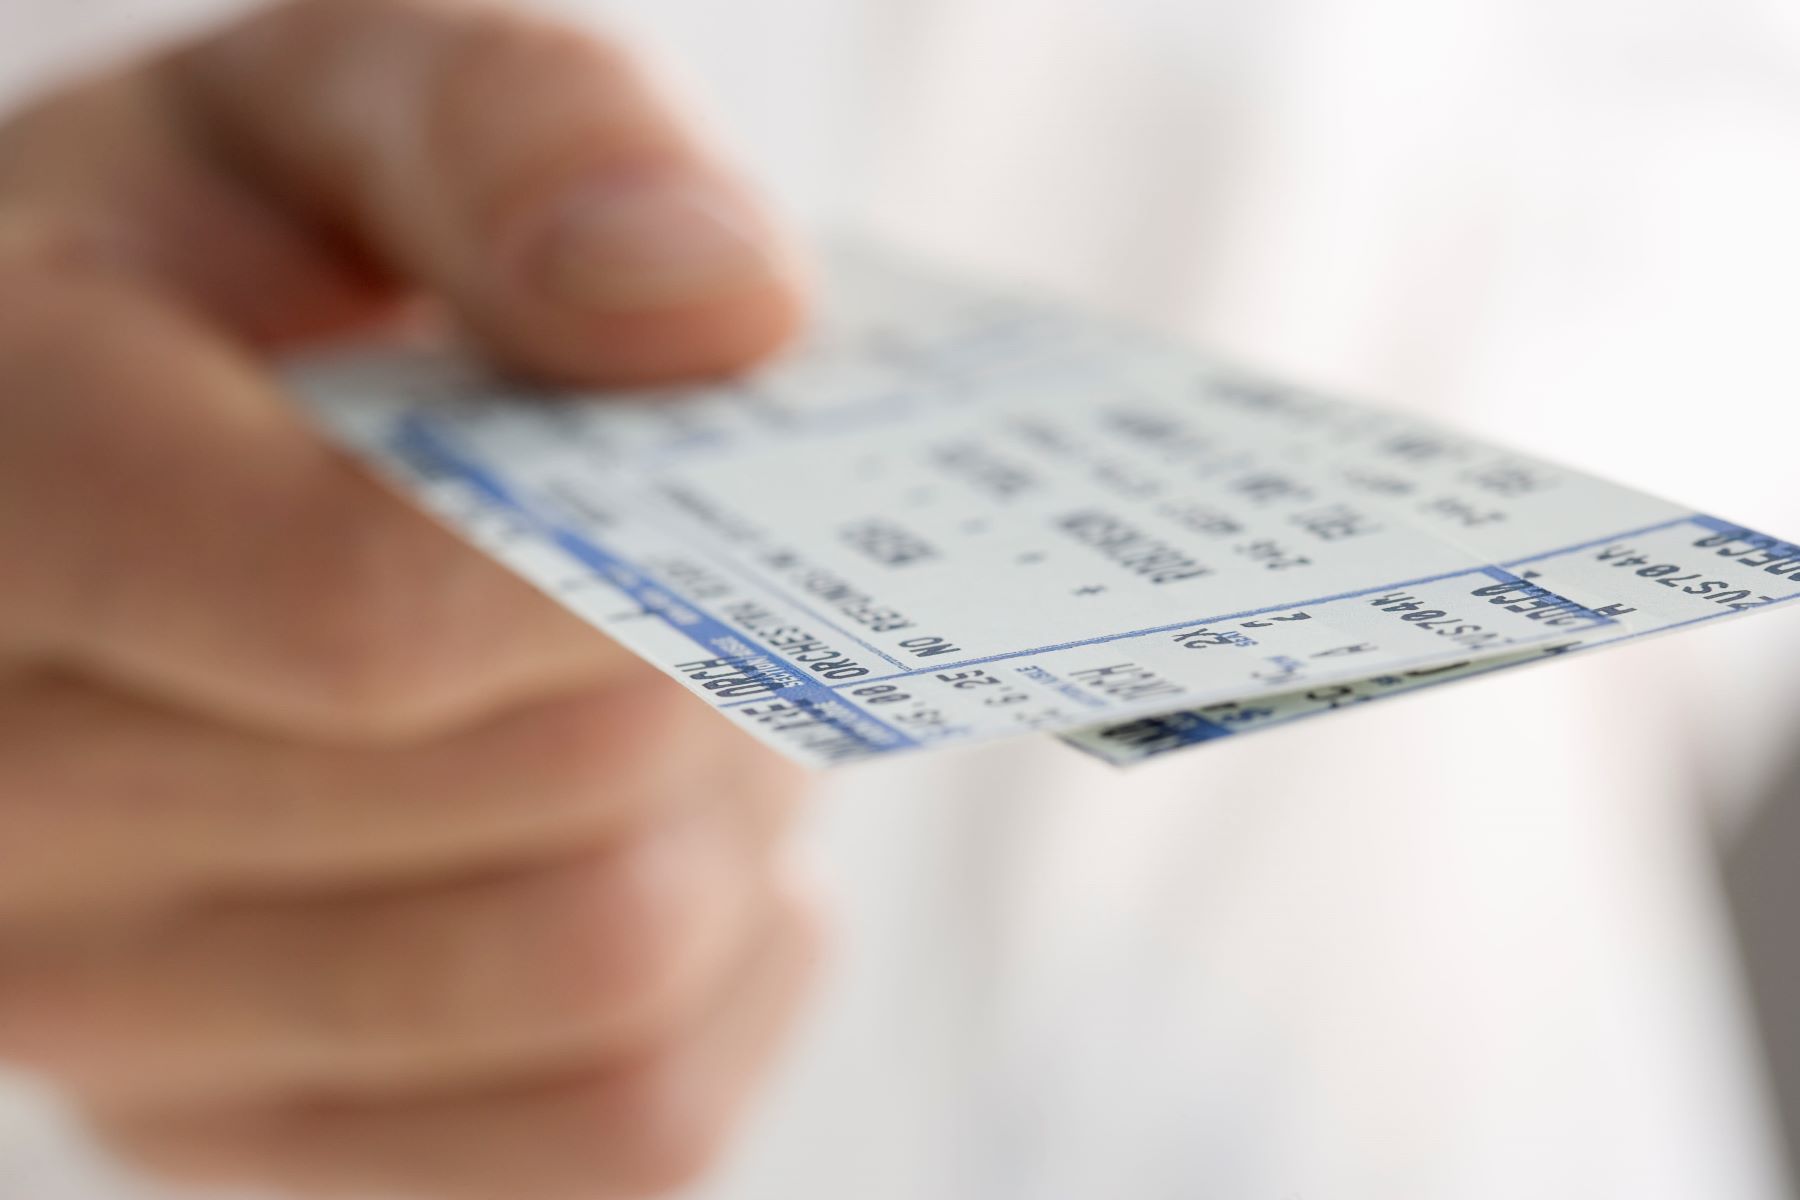 New Security Breach At See Tickets Exposes Customers’ Payment Data